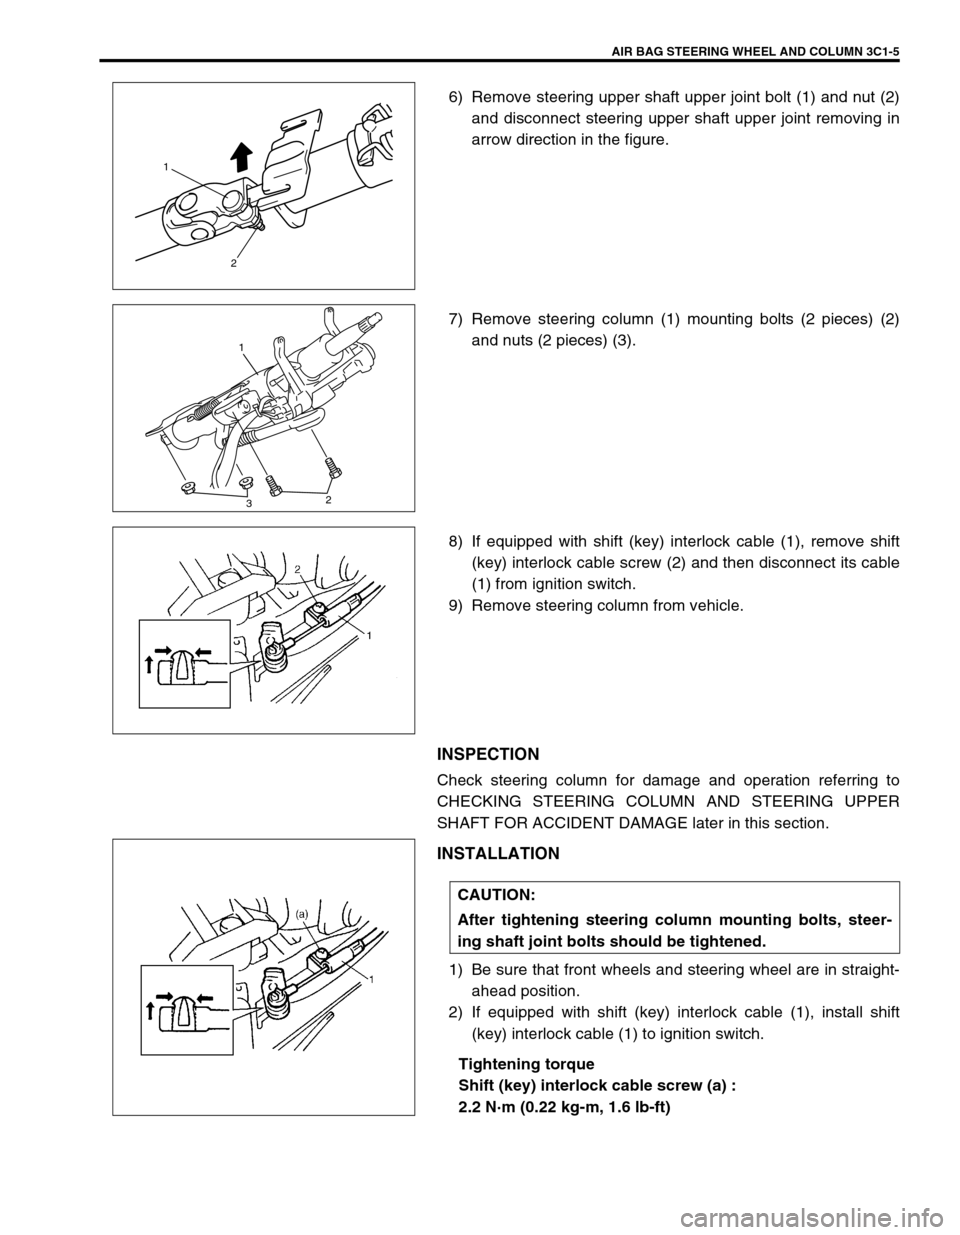 SUZUKI GRAND VITARA 2001 2.G Owners Manual AIR BAG STEERING WHEEL AND COLUMN 3C1-5
6) Remove steering upper shaft upper joint bolt (1) and nut (2)
and disconnect steering upper shaft upper joint removing in
arrow direction in the figure.
7) Re